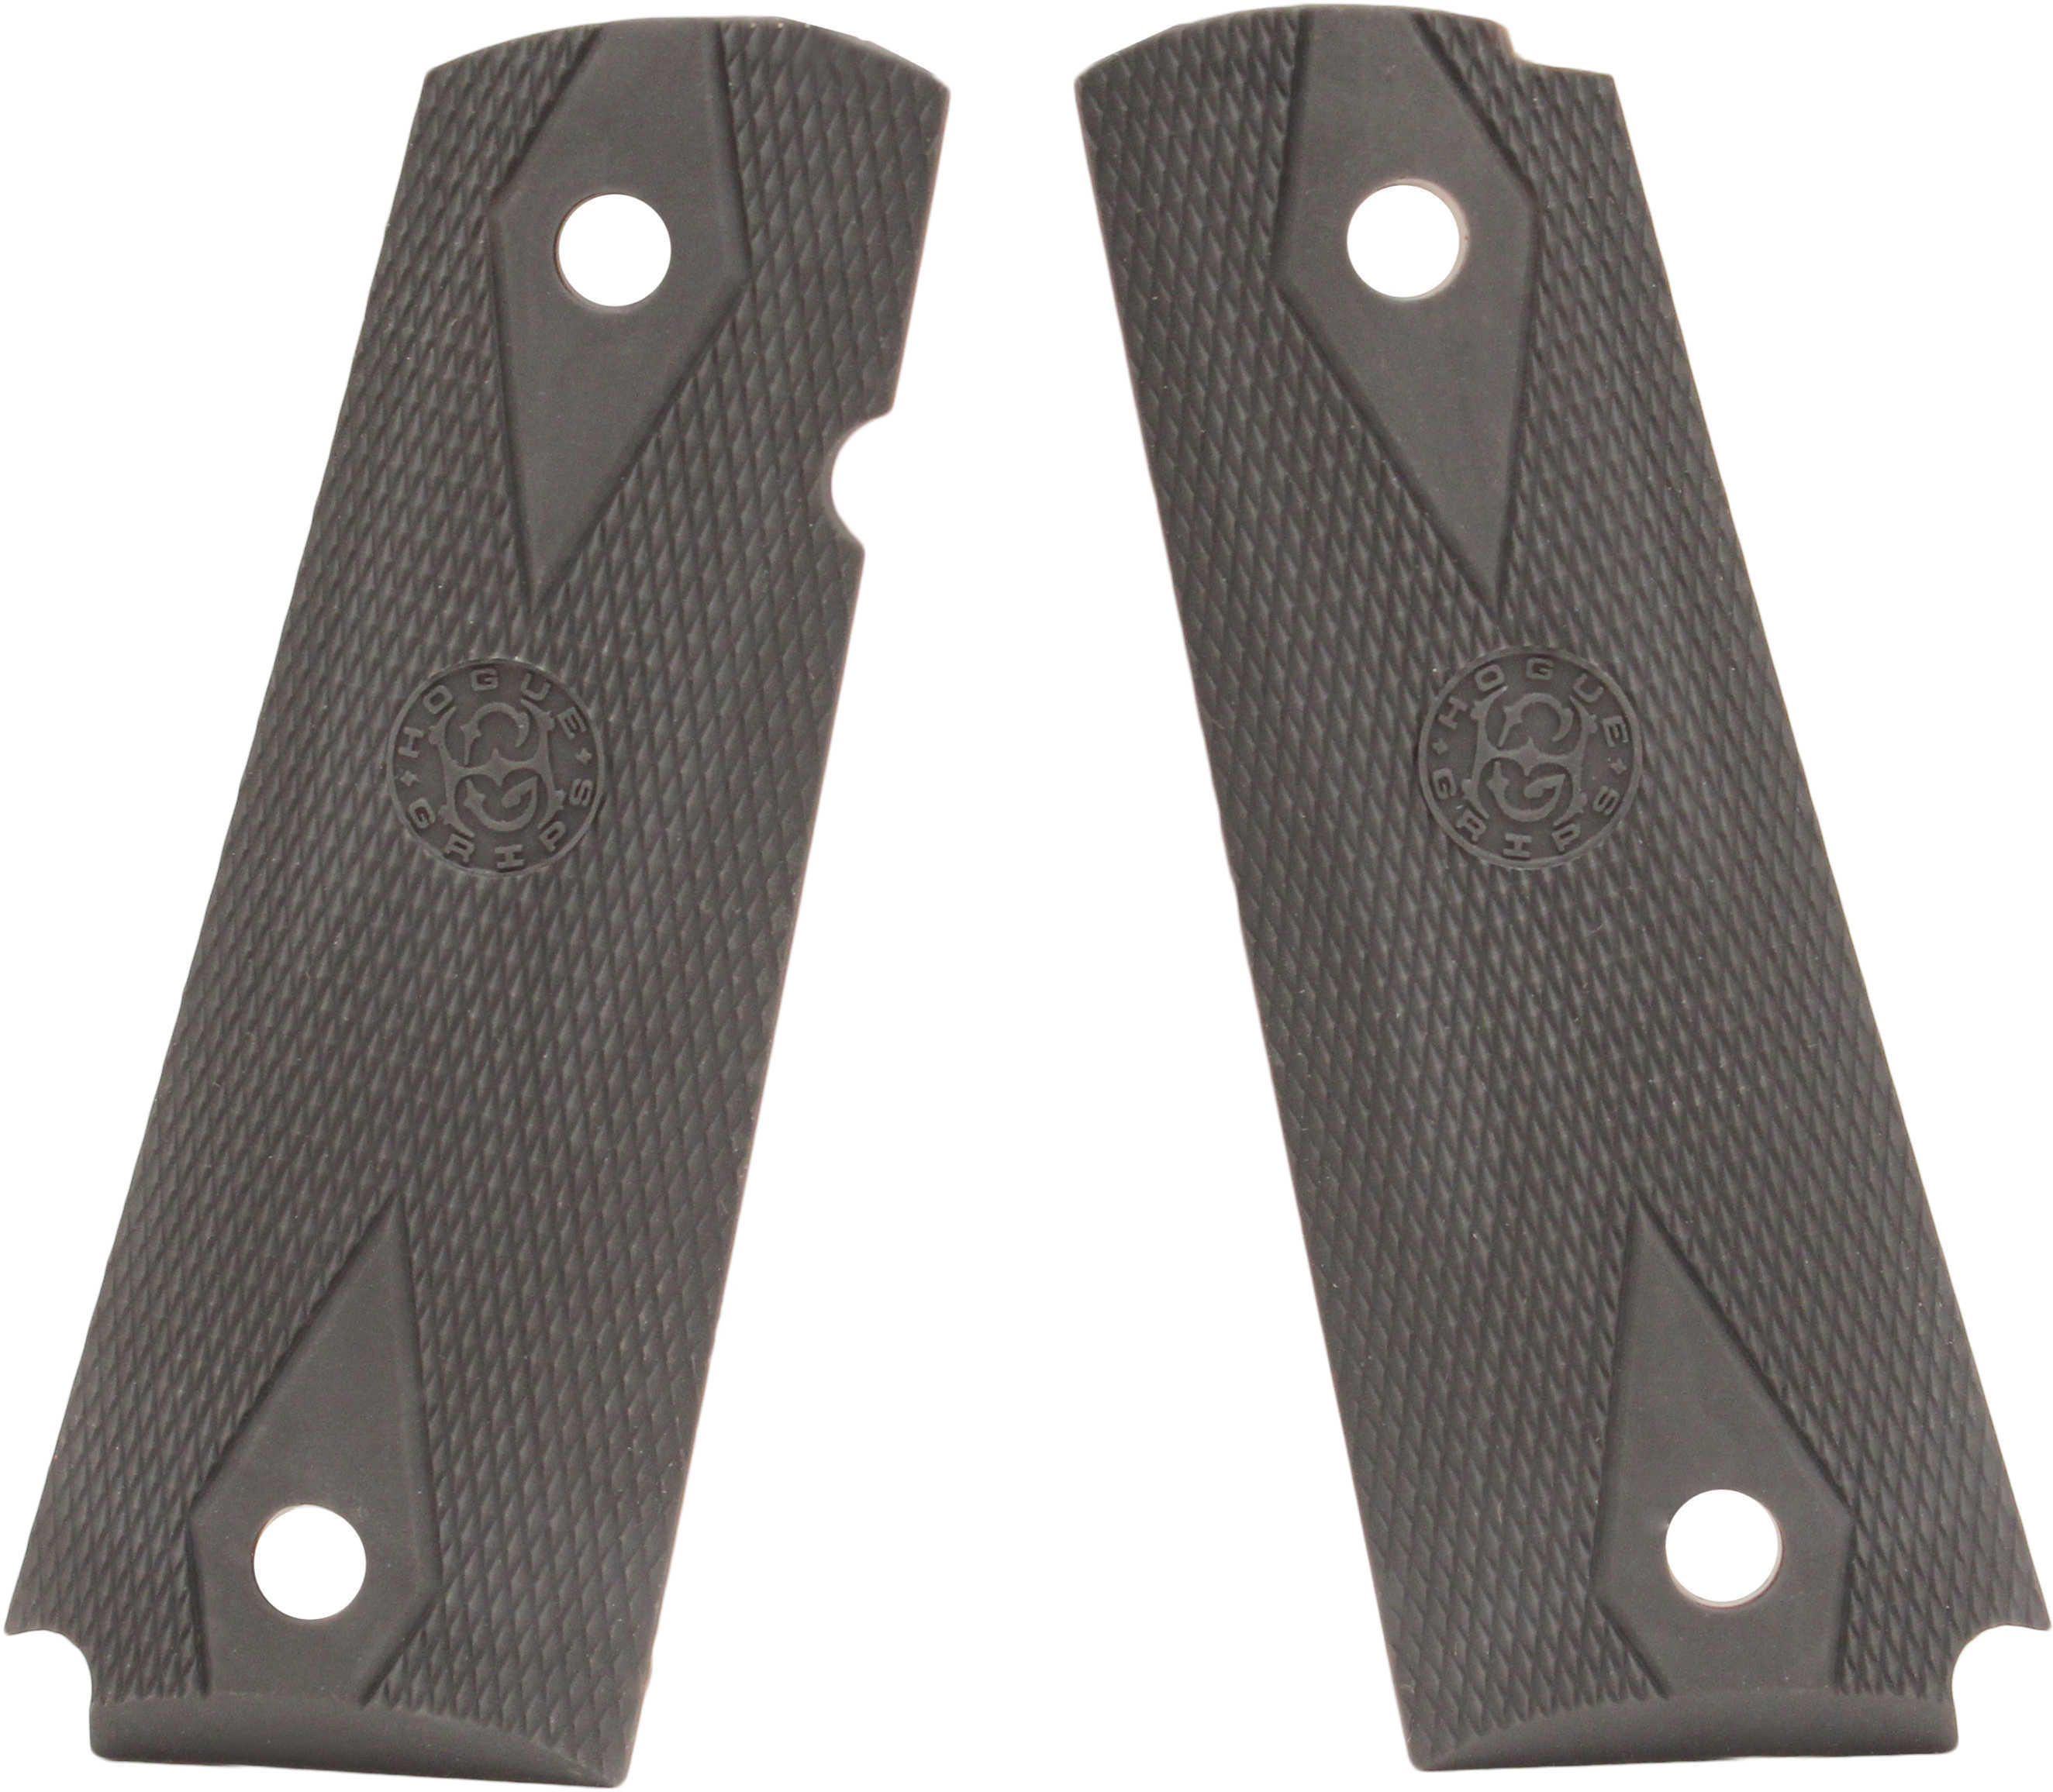 Hogue Colt Government Rubber Grip Panels, Checkered with Diamonds Pewter 45012